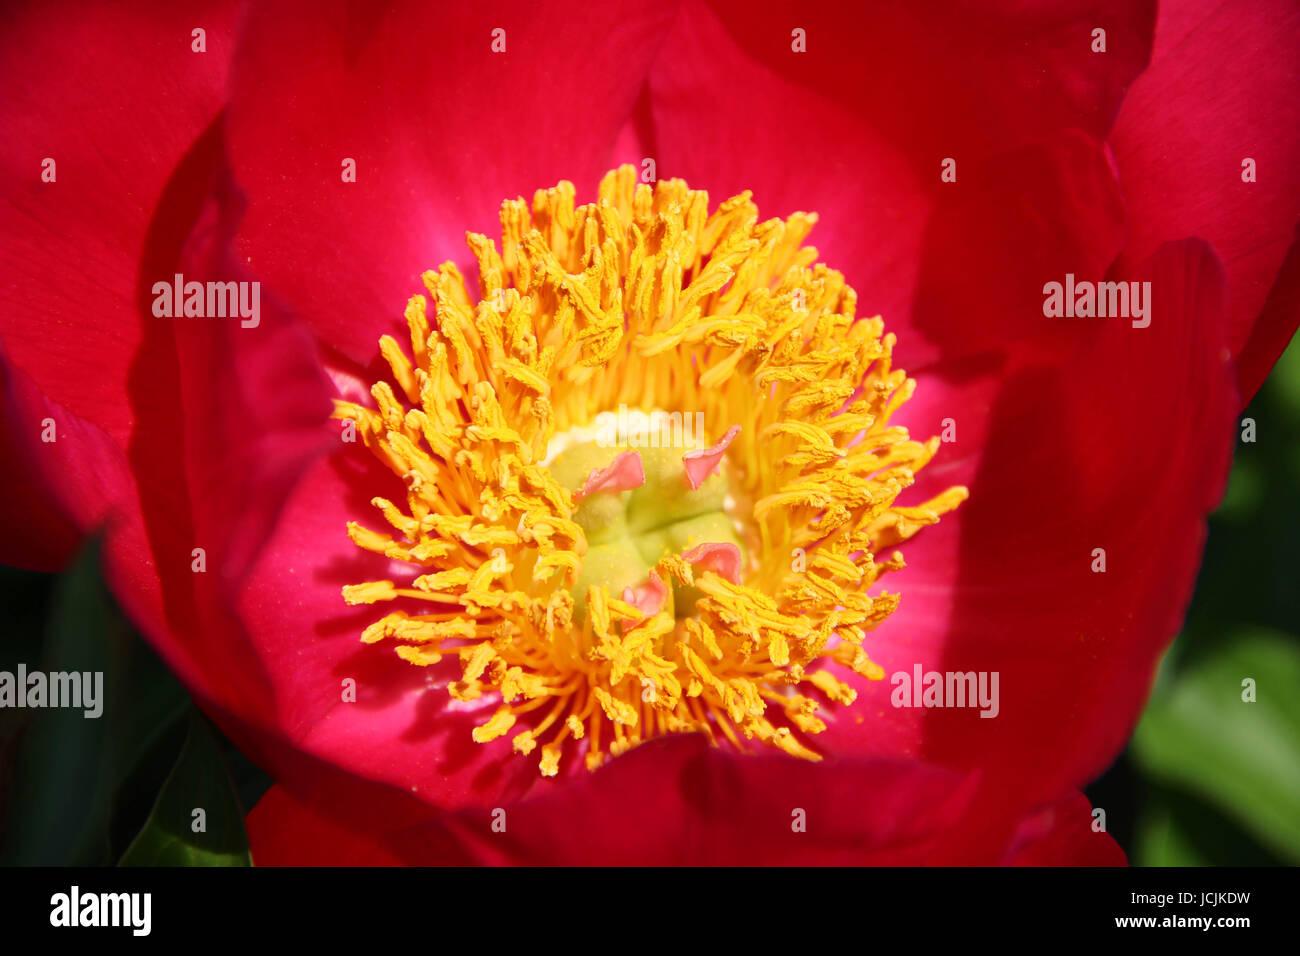 Close Up Pink Peony Flower Head with Pistil and Staminas, Peony Fest Stock Photo